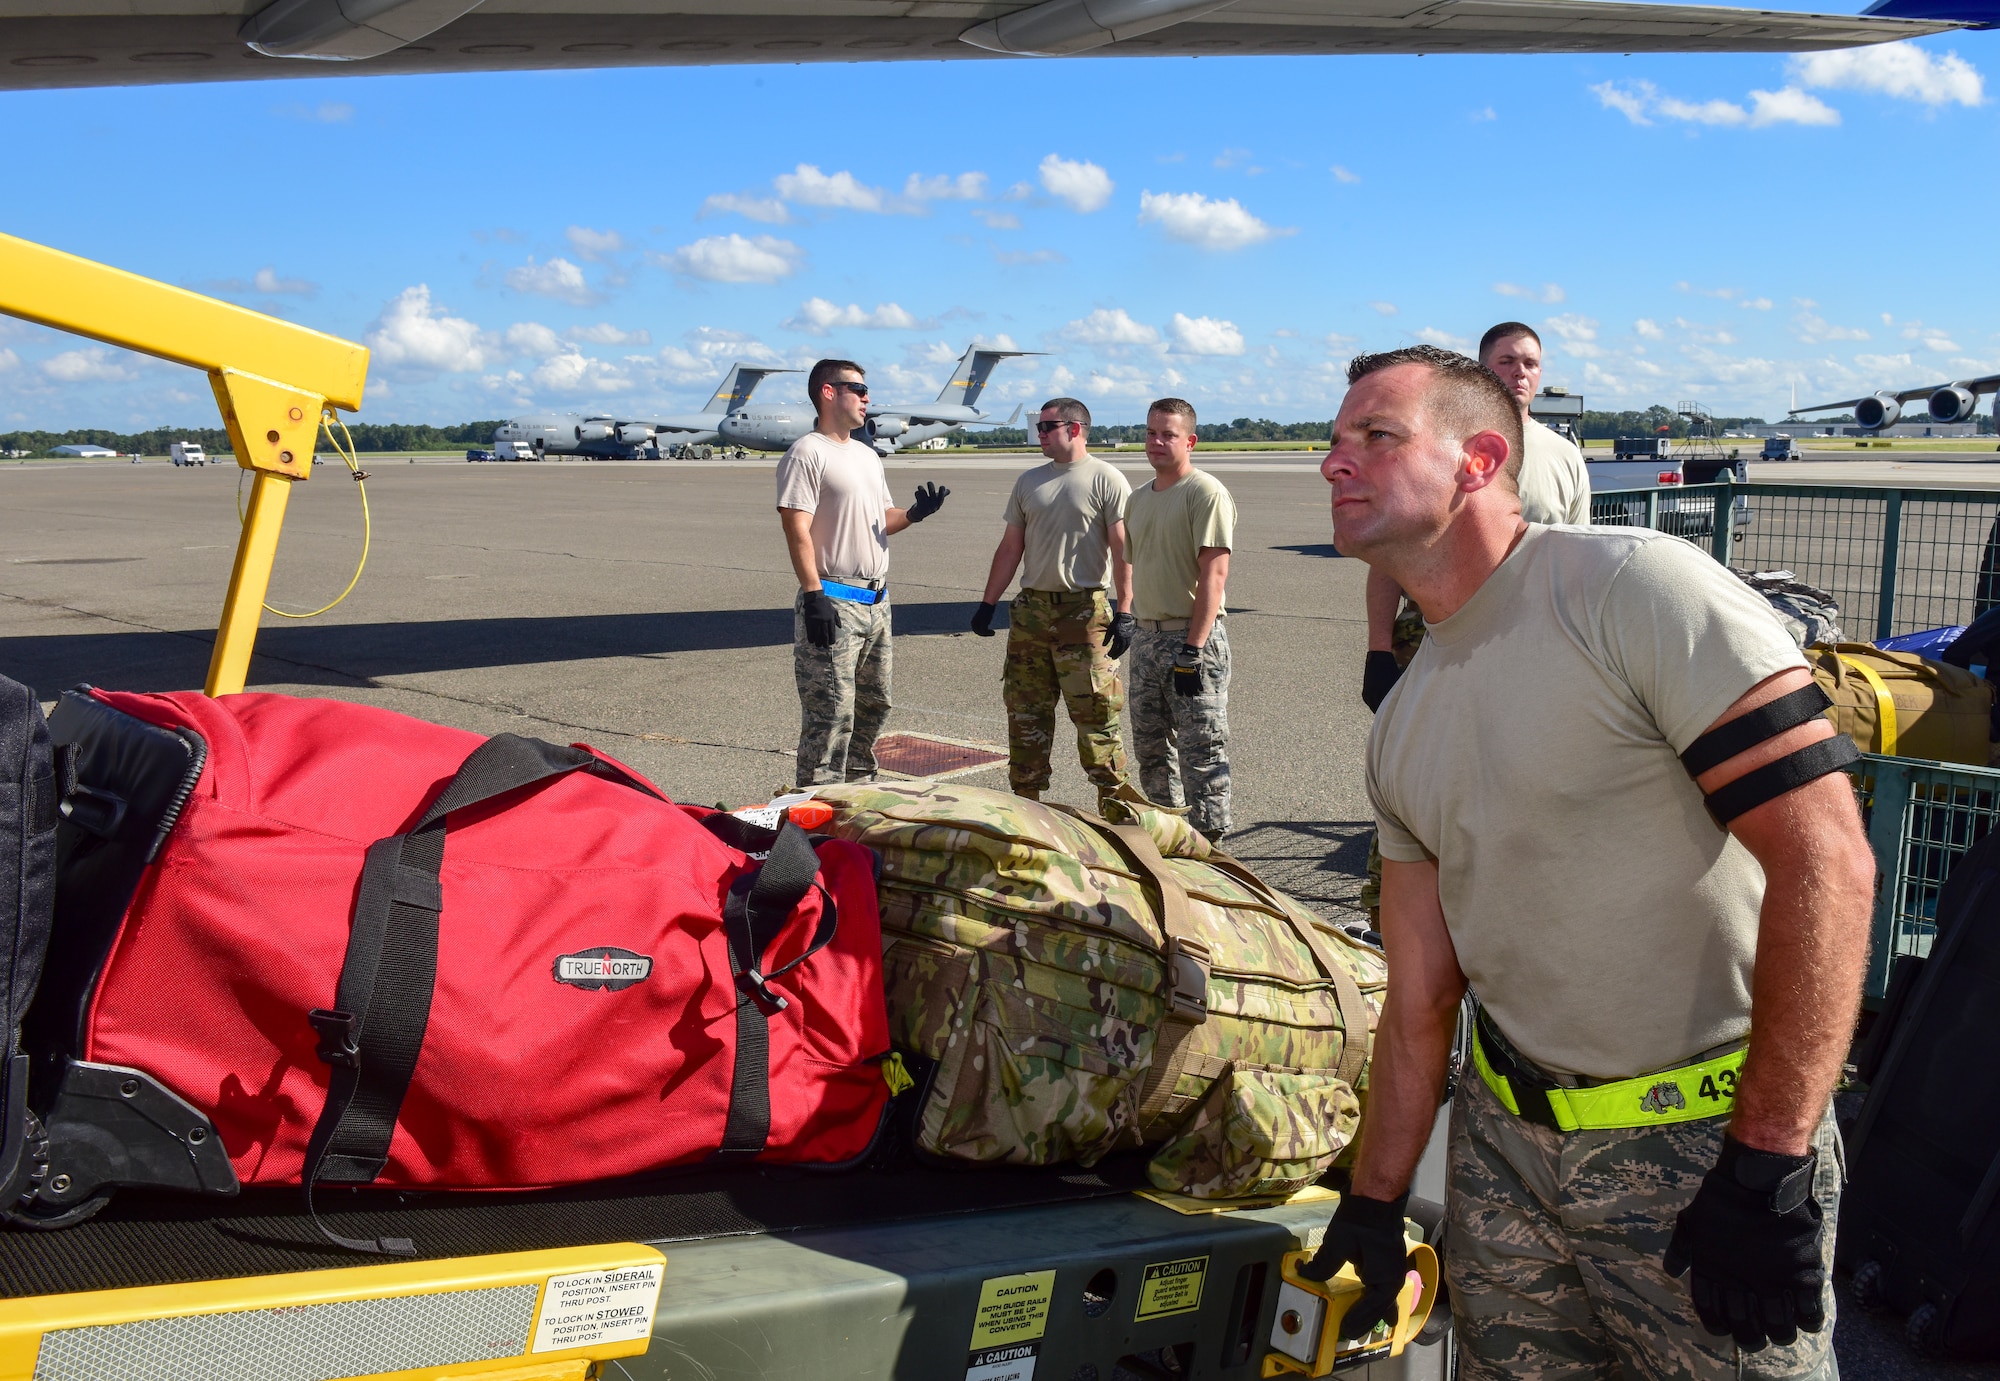 Airman 1st Class Ian Huffman, 437th Aerial Port Squadron passenger operations technician, moves baggage up a conveyer while loading luggage as part of a mission to deploy service members through Joint Base Charleston Oct. 15, 2018 in support of the Naval Station Norfolk air terminal while their airfield under goes scheduled maintenance.